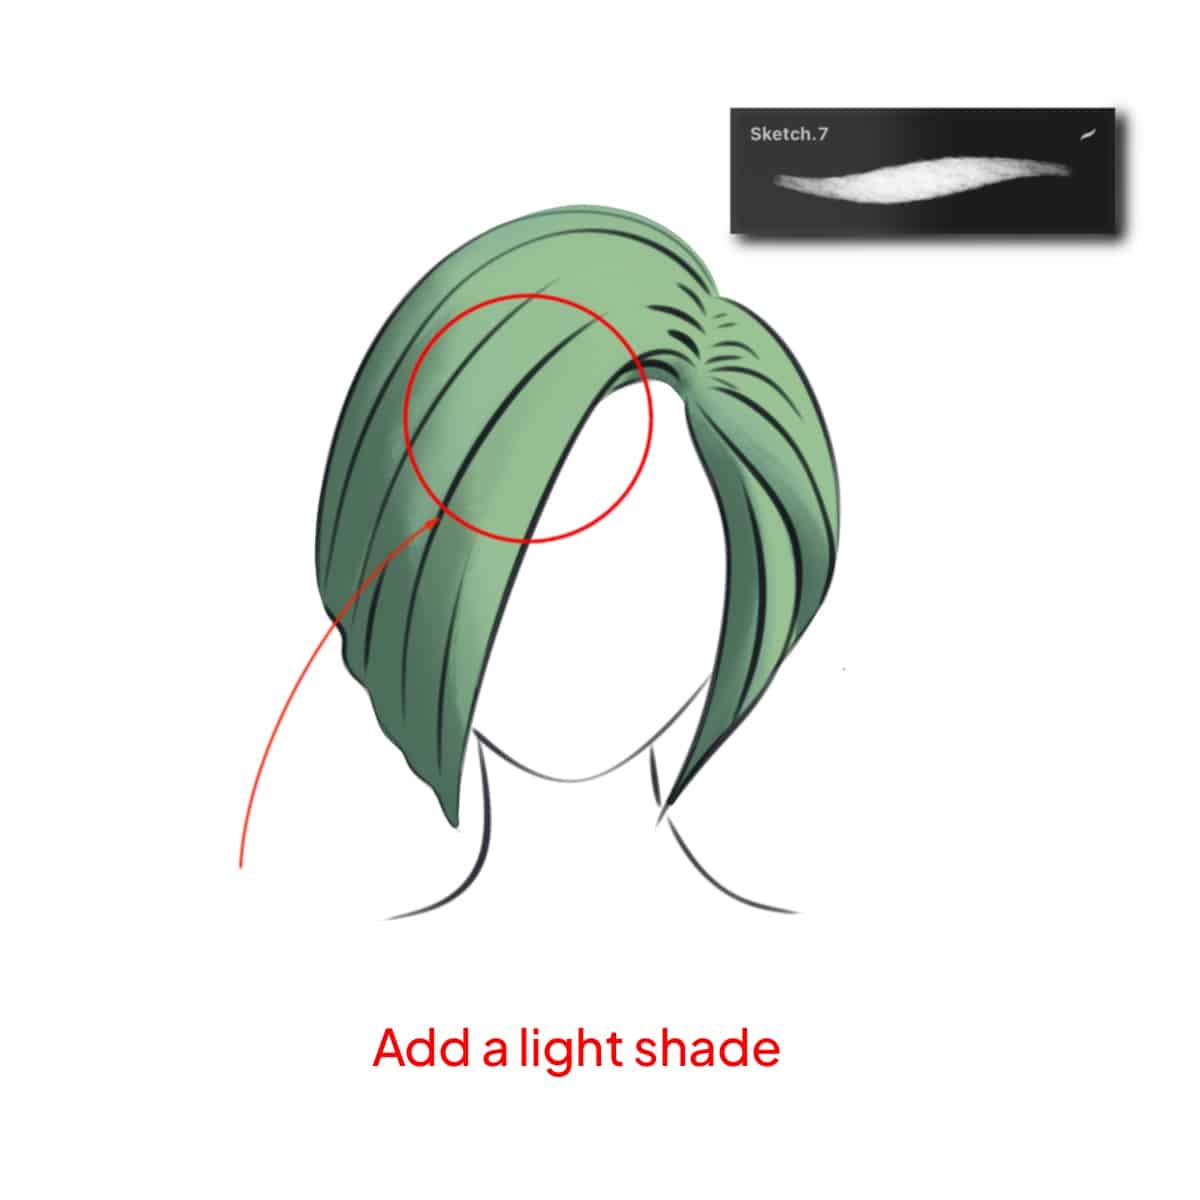 Drawn and colored sketch of the short woman's hairstyle with added light shade in the Procreate application